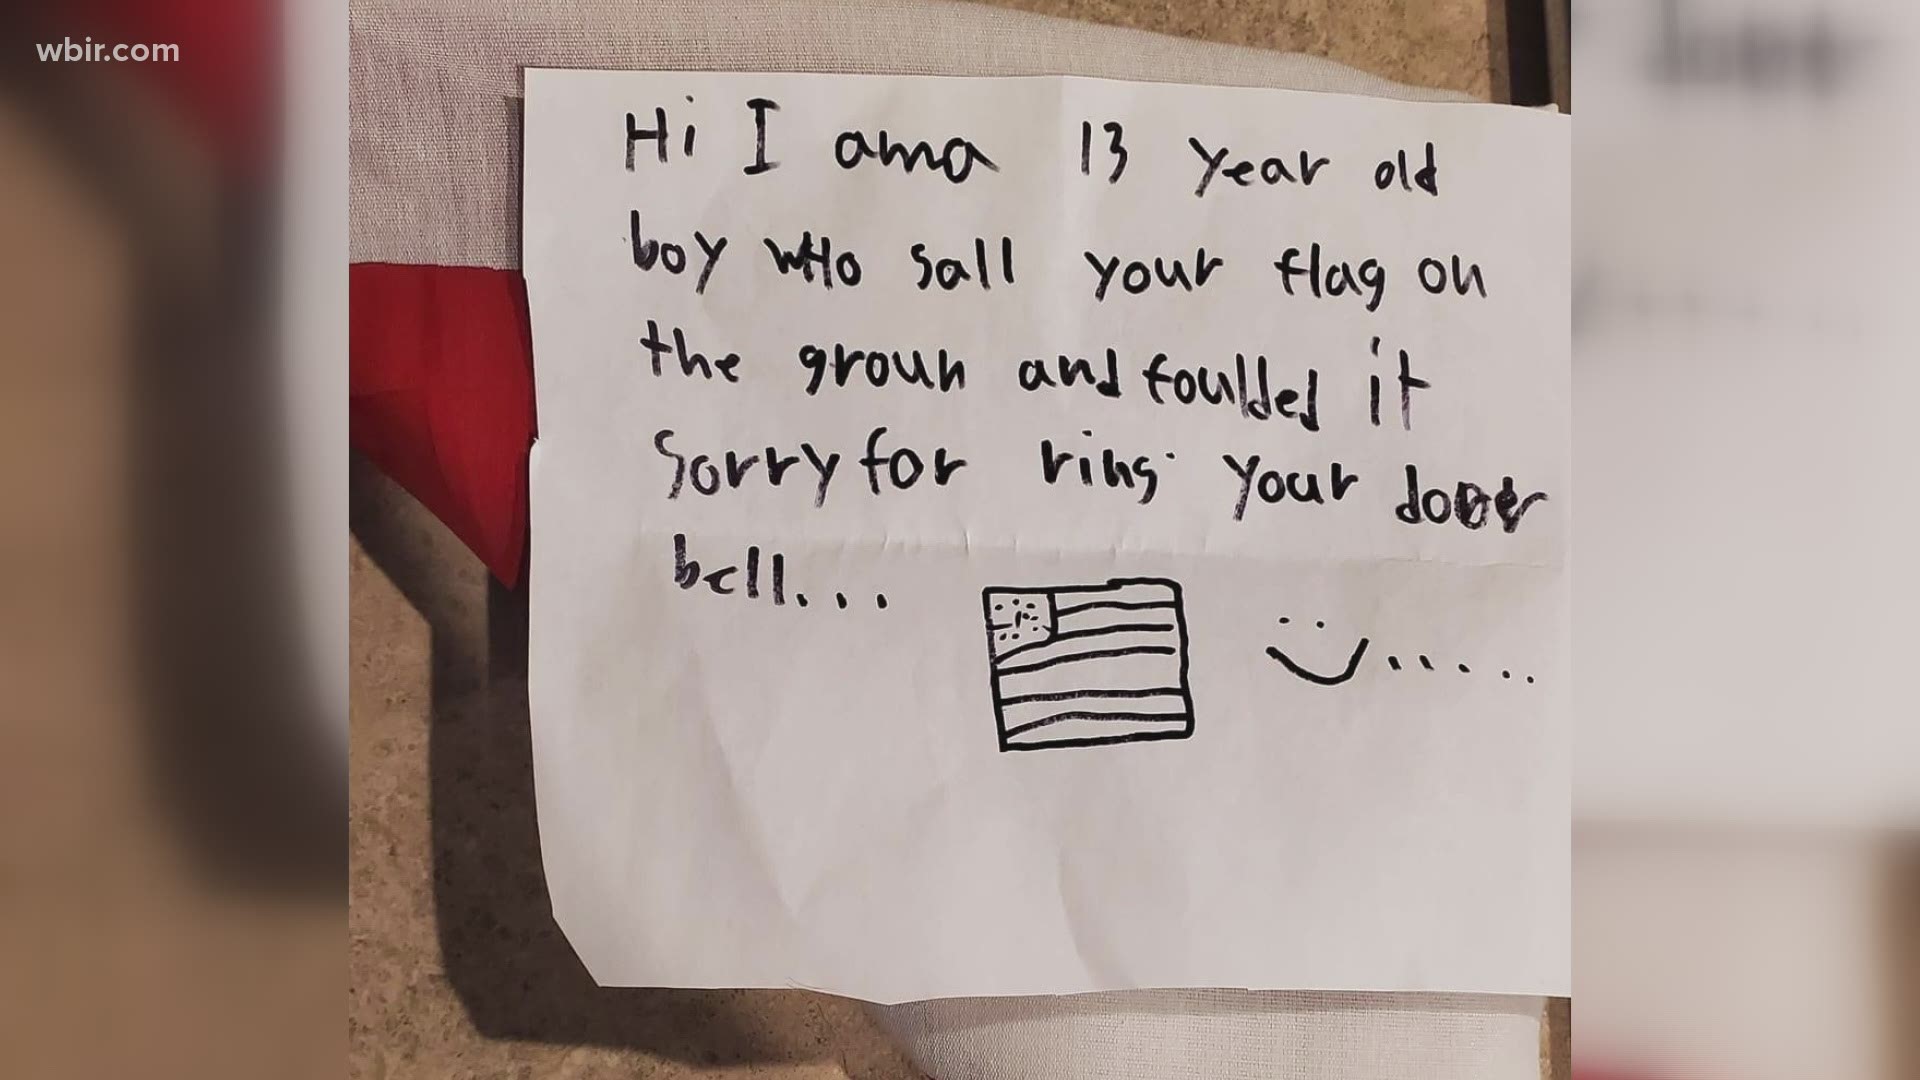 While Chris Rose was away, the wind blew down the American flag outside of his house. A teen walking by with his dog noticed and decided to return it.